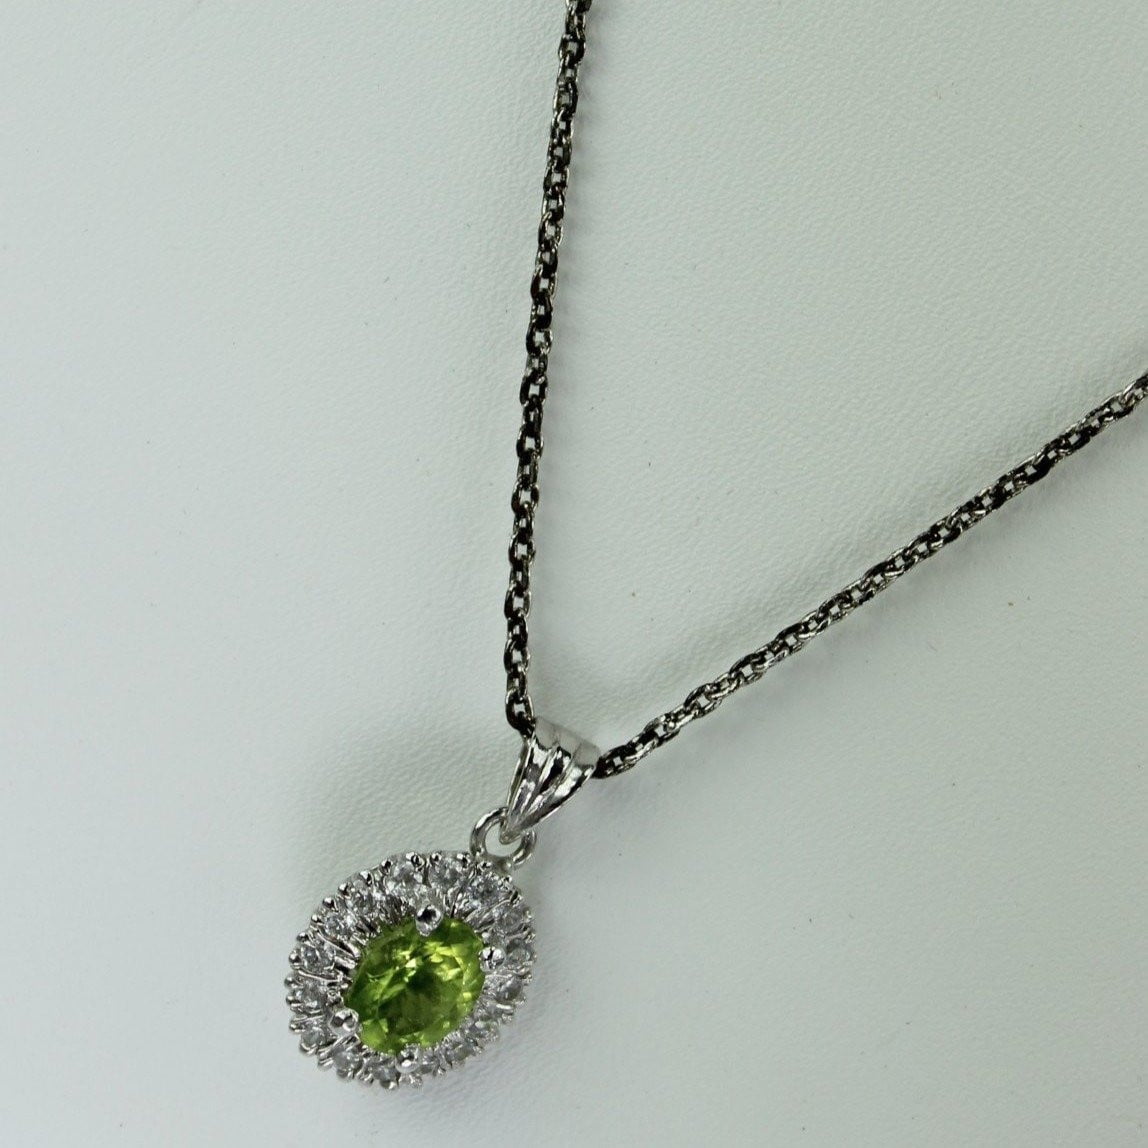 Peridot Sterling Pendant Necklace Silver Chain Green Color Focal bright